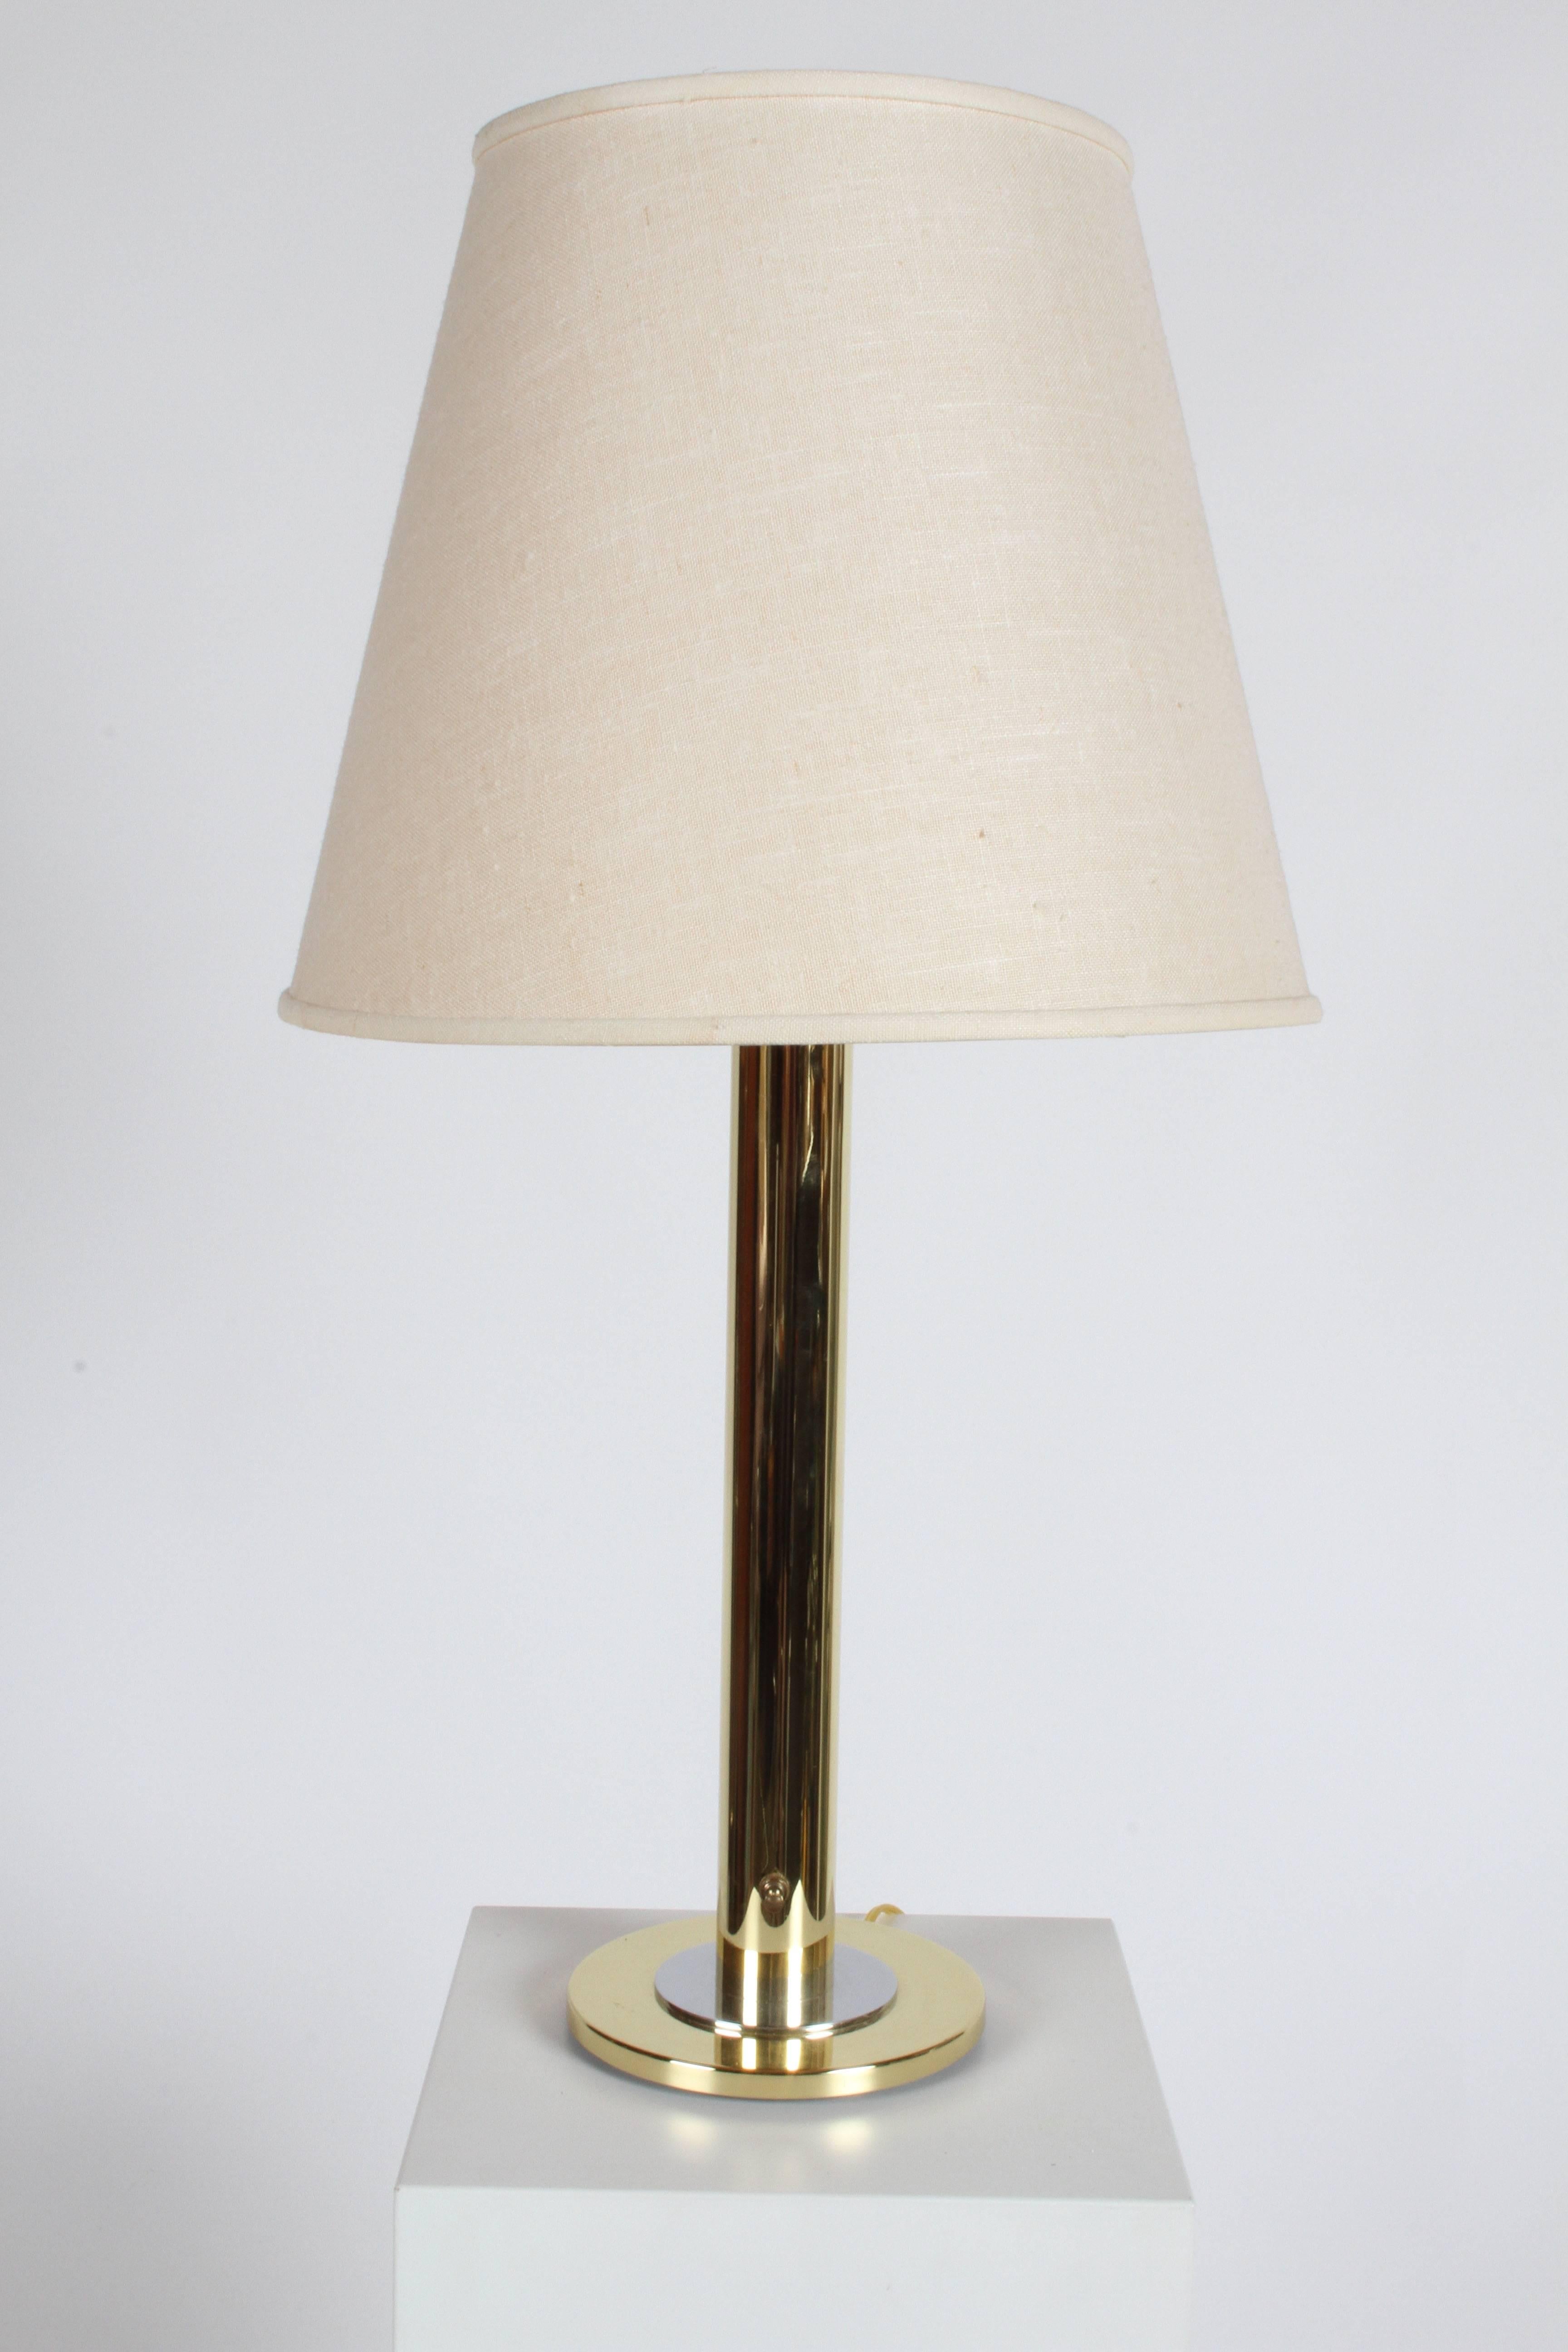 Pair of Nessen NT754 Polished Brass and Chrome Table Lamps In Good Condition For Sale In St. Louis, MO